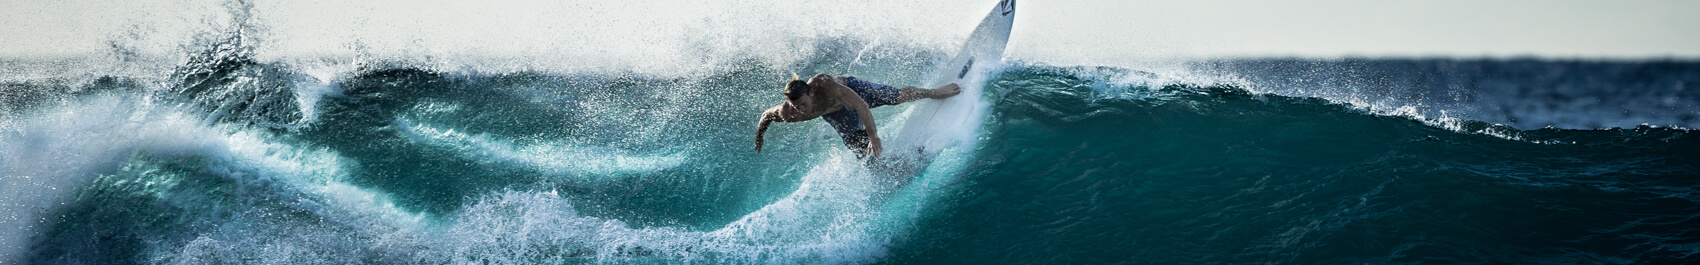 Surfer wearing blue surf shorts on a white surfboard surfing on a wave in the crystal blue water